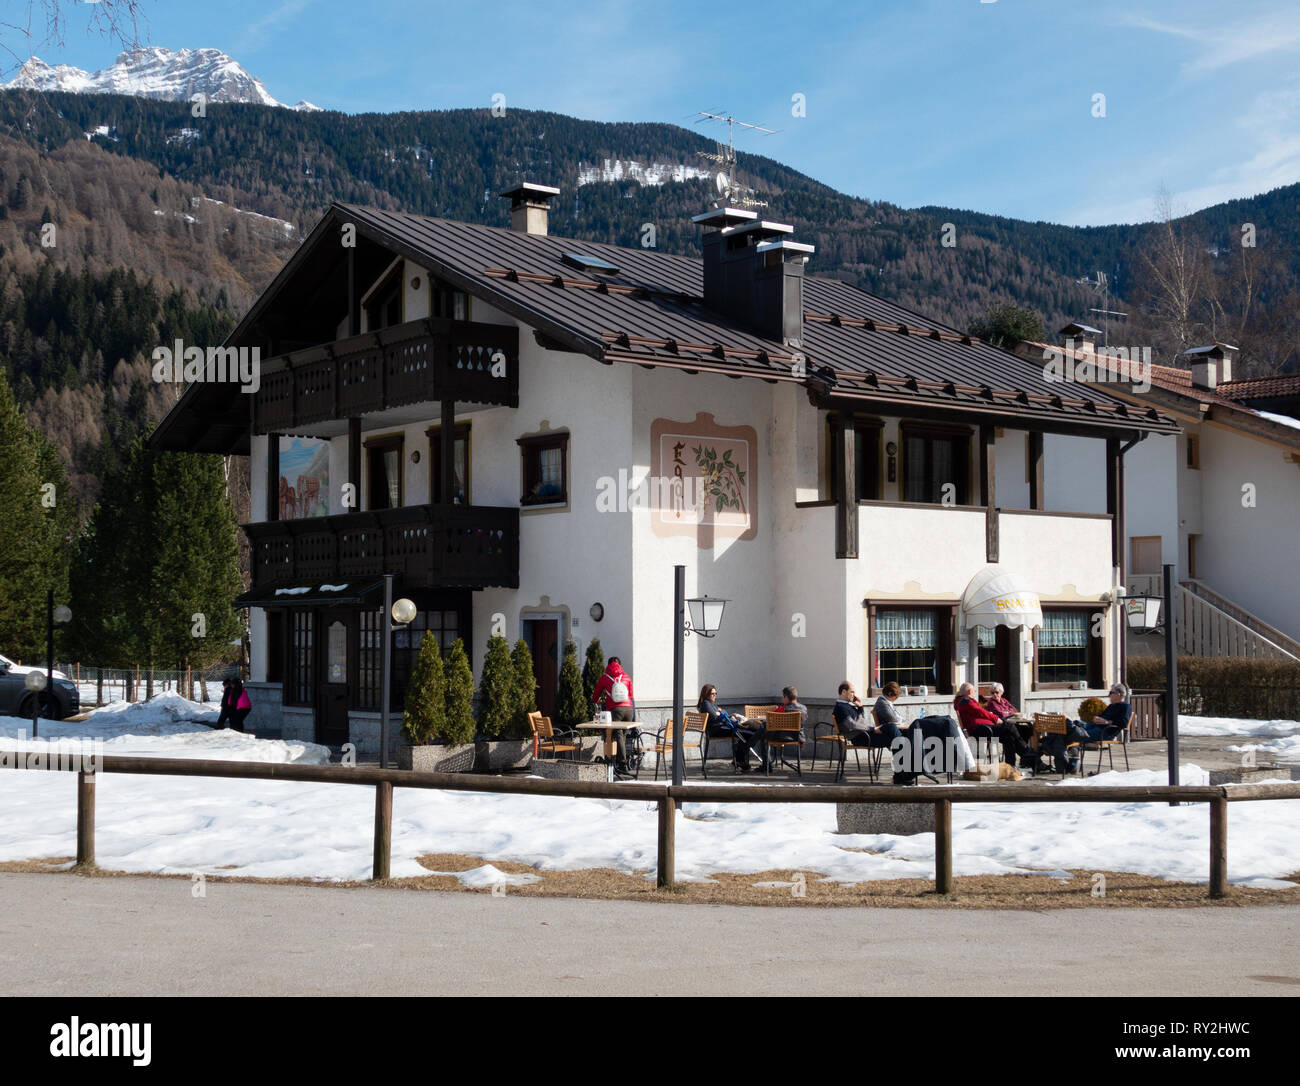 Italy cafe - people sitting outside a cafe in the snow with winter sunshine in March; Pinzolo village, Brenta Dolomites, northern Italy Europe Stock Photo